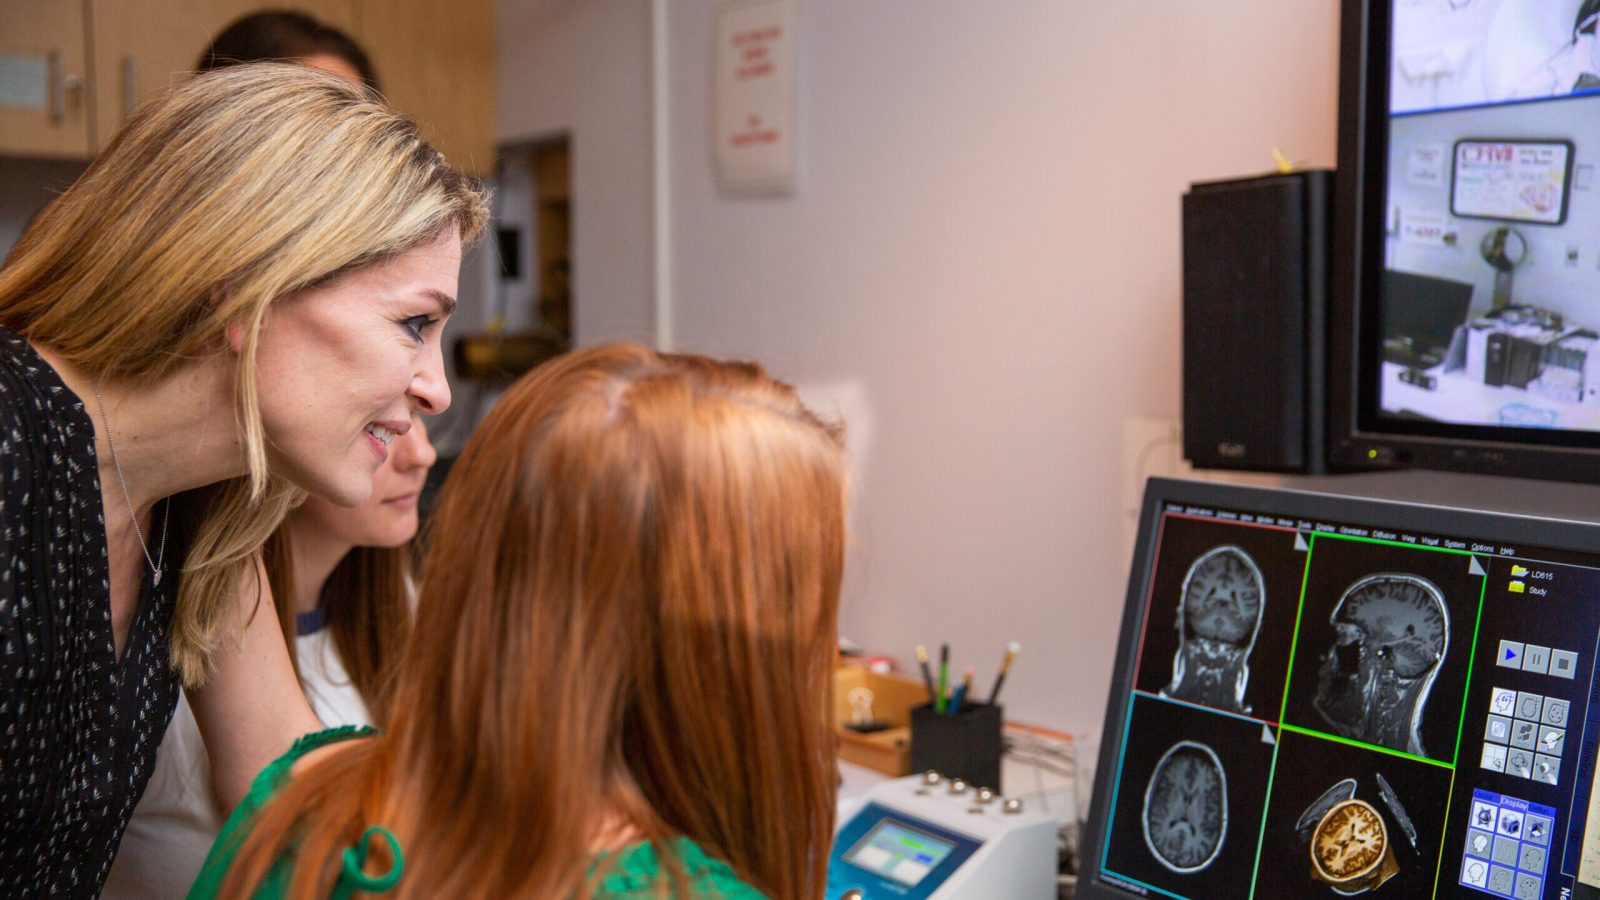 Professor Abigail Marsh (far left) looks over MRI scans with a student (right) in her lab.